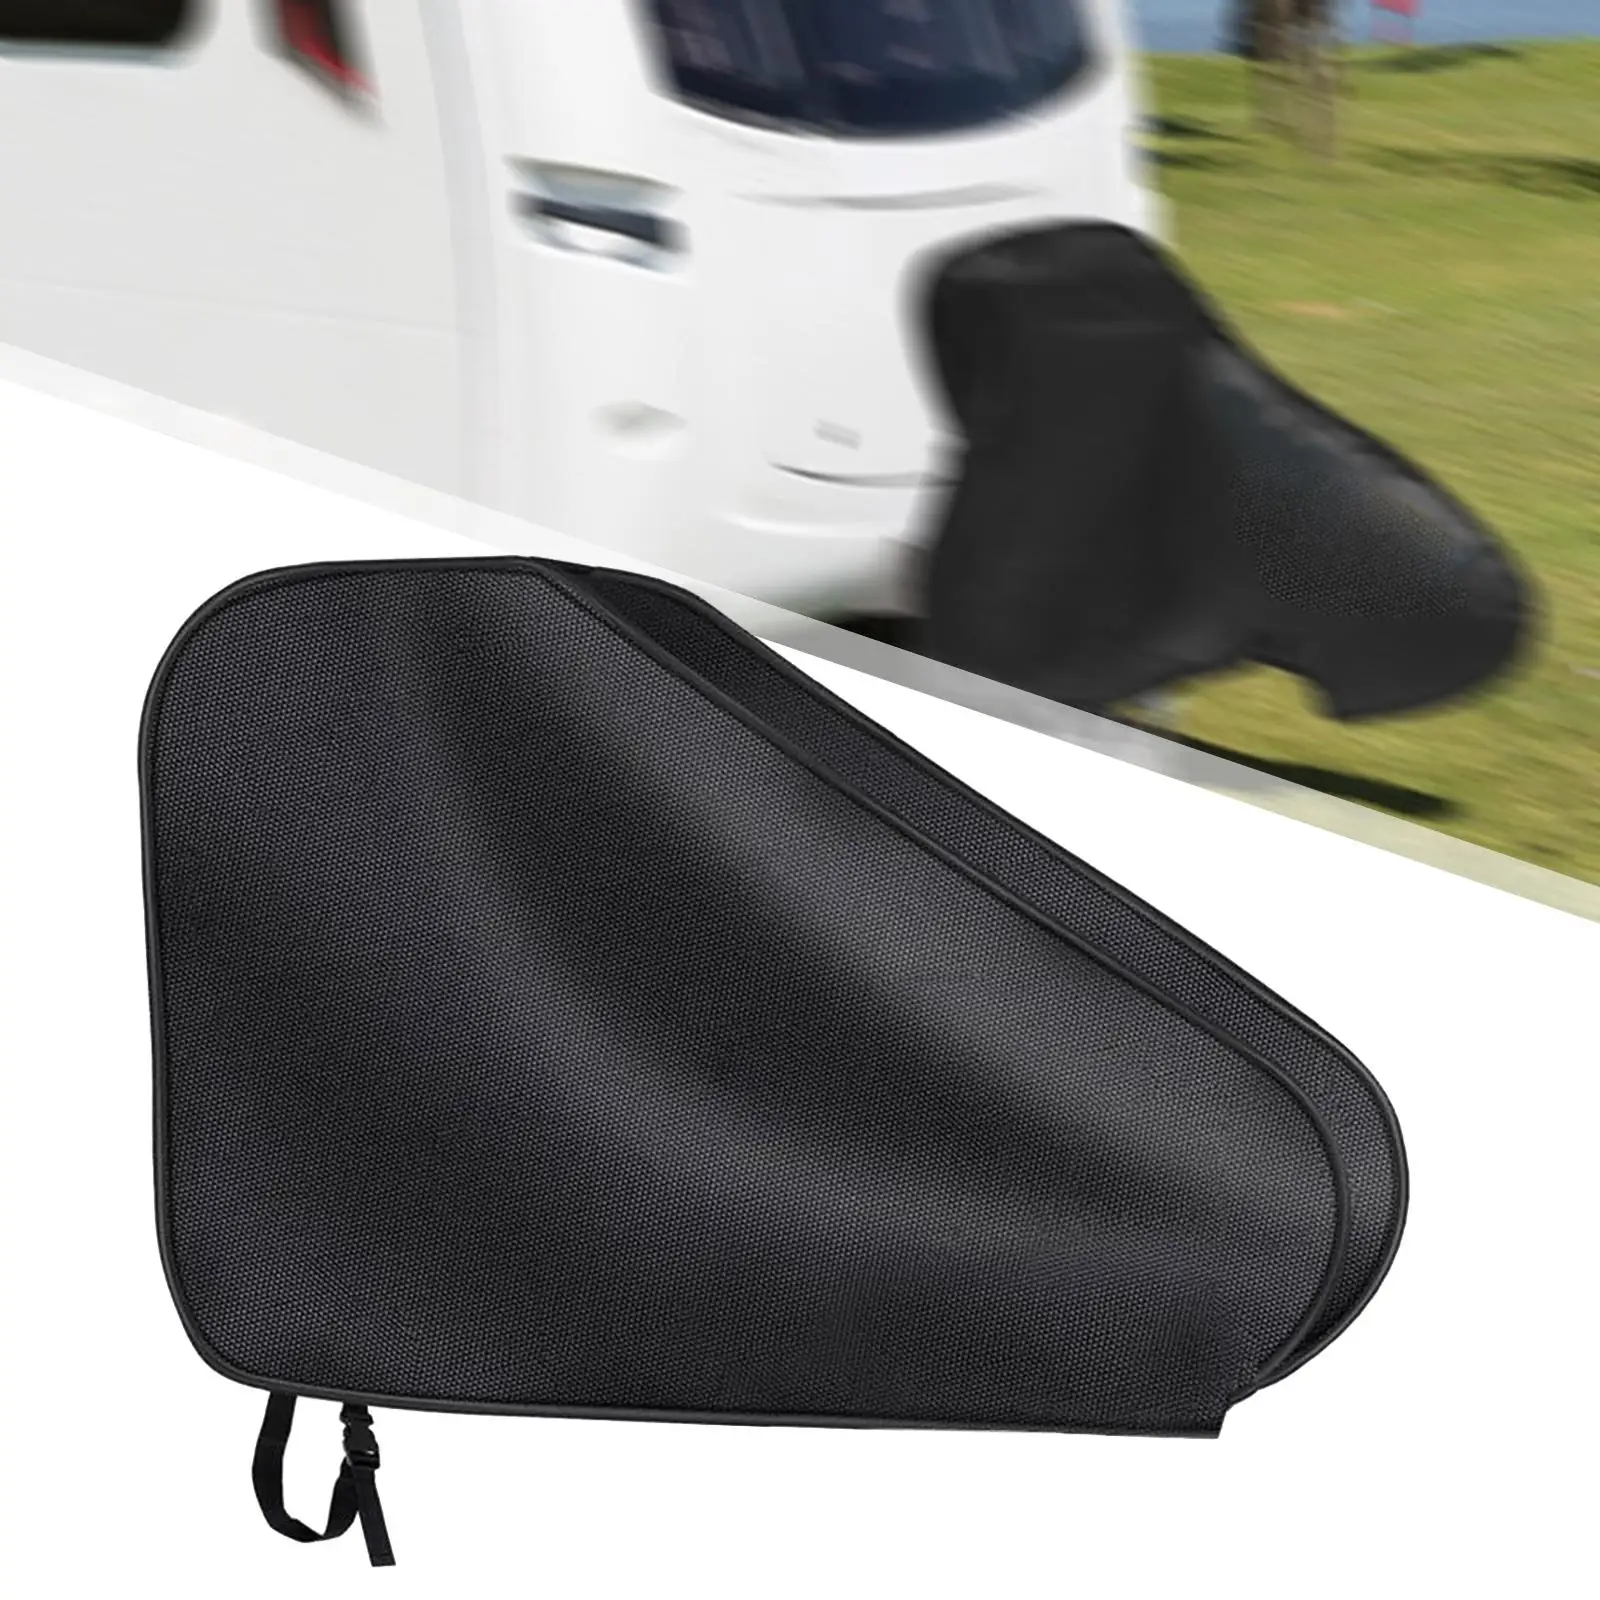 Caravan Hitch Cover Protector, Dustproof Waterproof 600D Oxford Cloth, Trailer Towing Ball Coupling Lock Cover